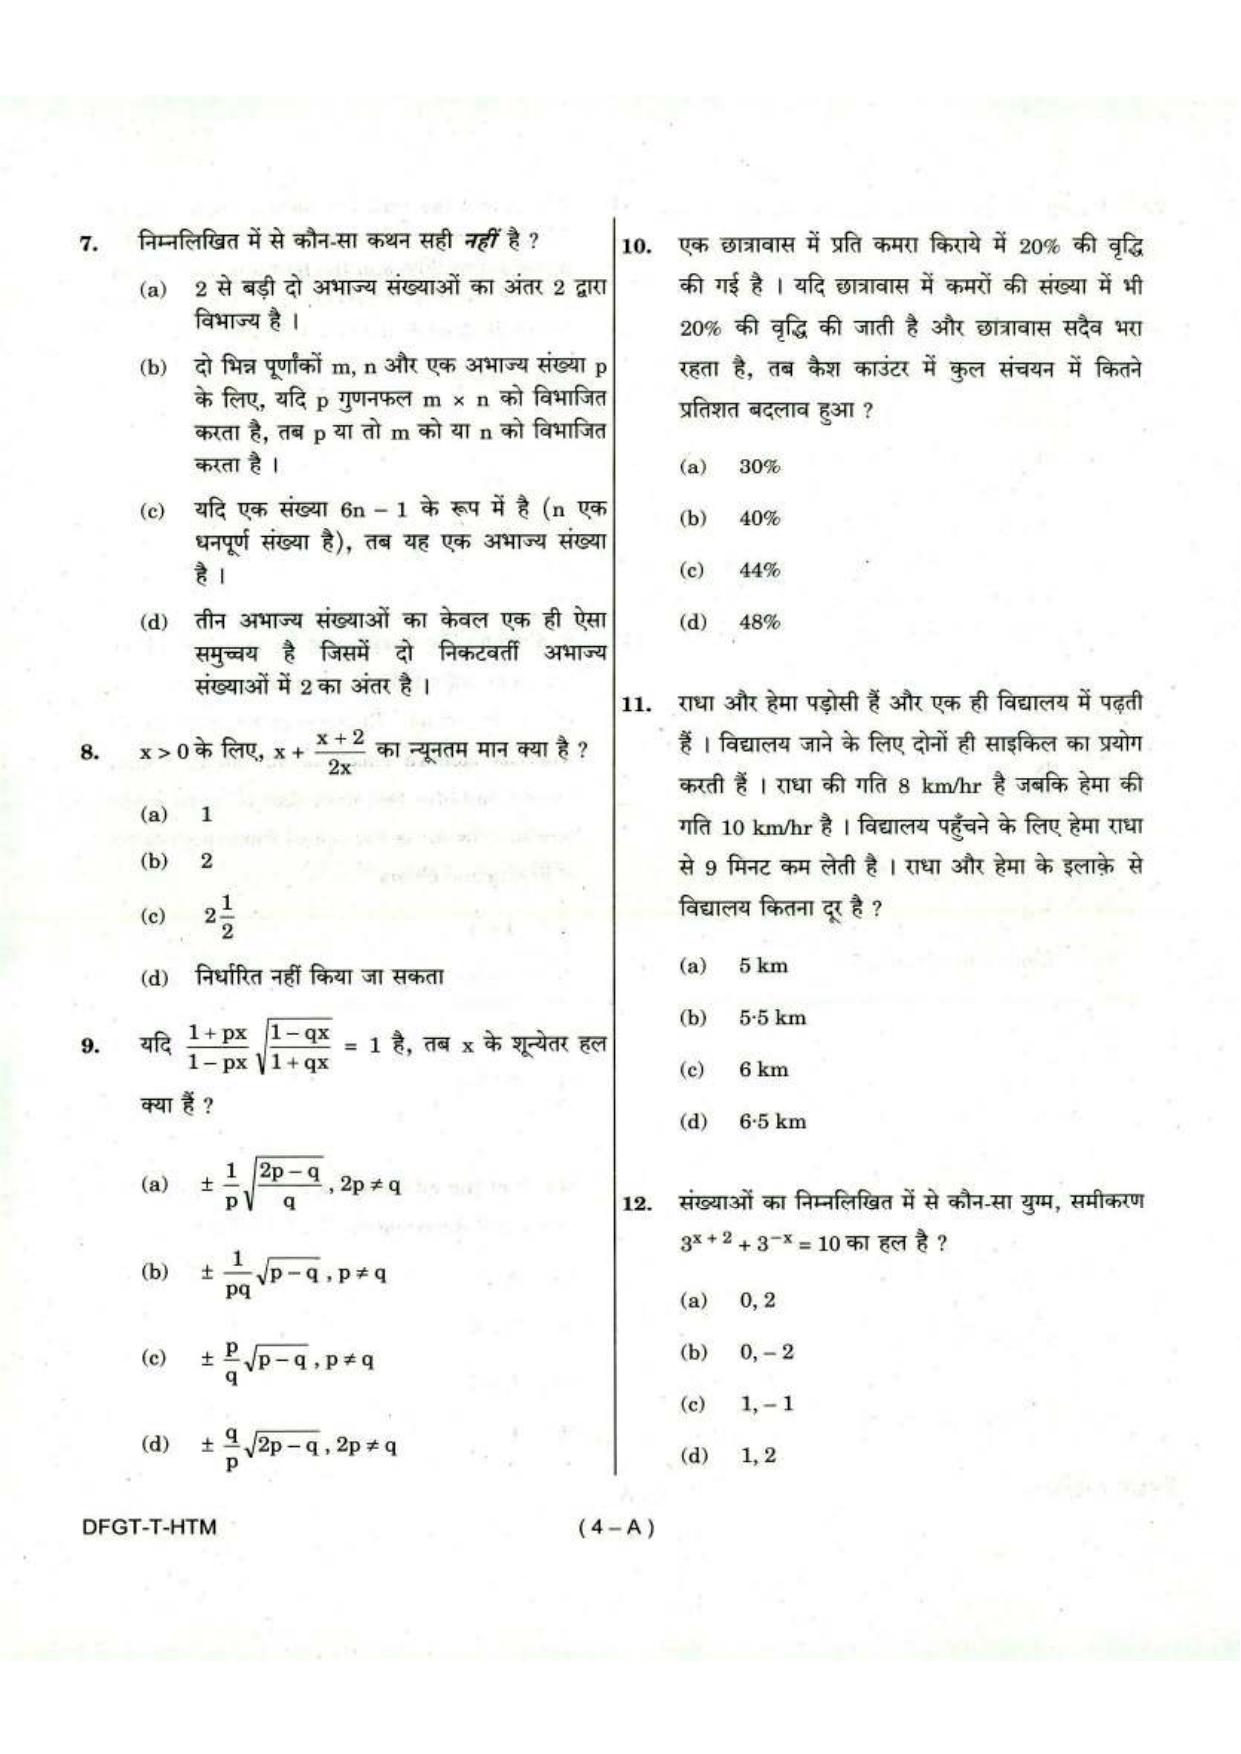 PBSSD Elementary Mathematics Practice Papers For BLS, PADEO & Other Posts - Page 4